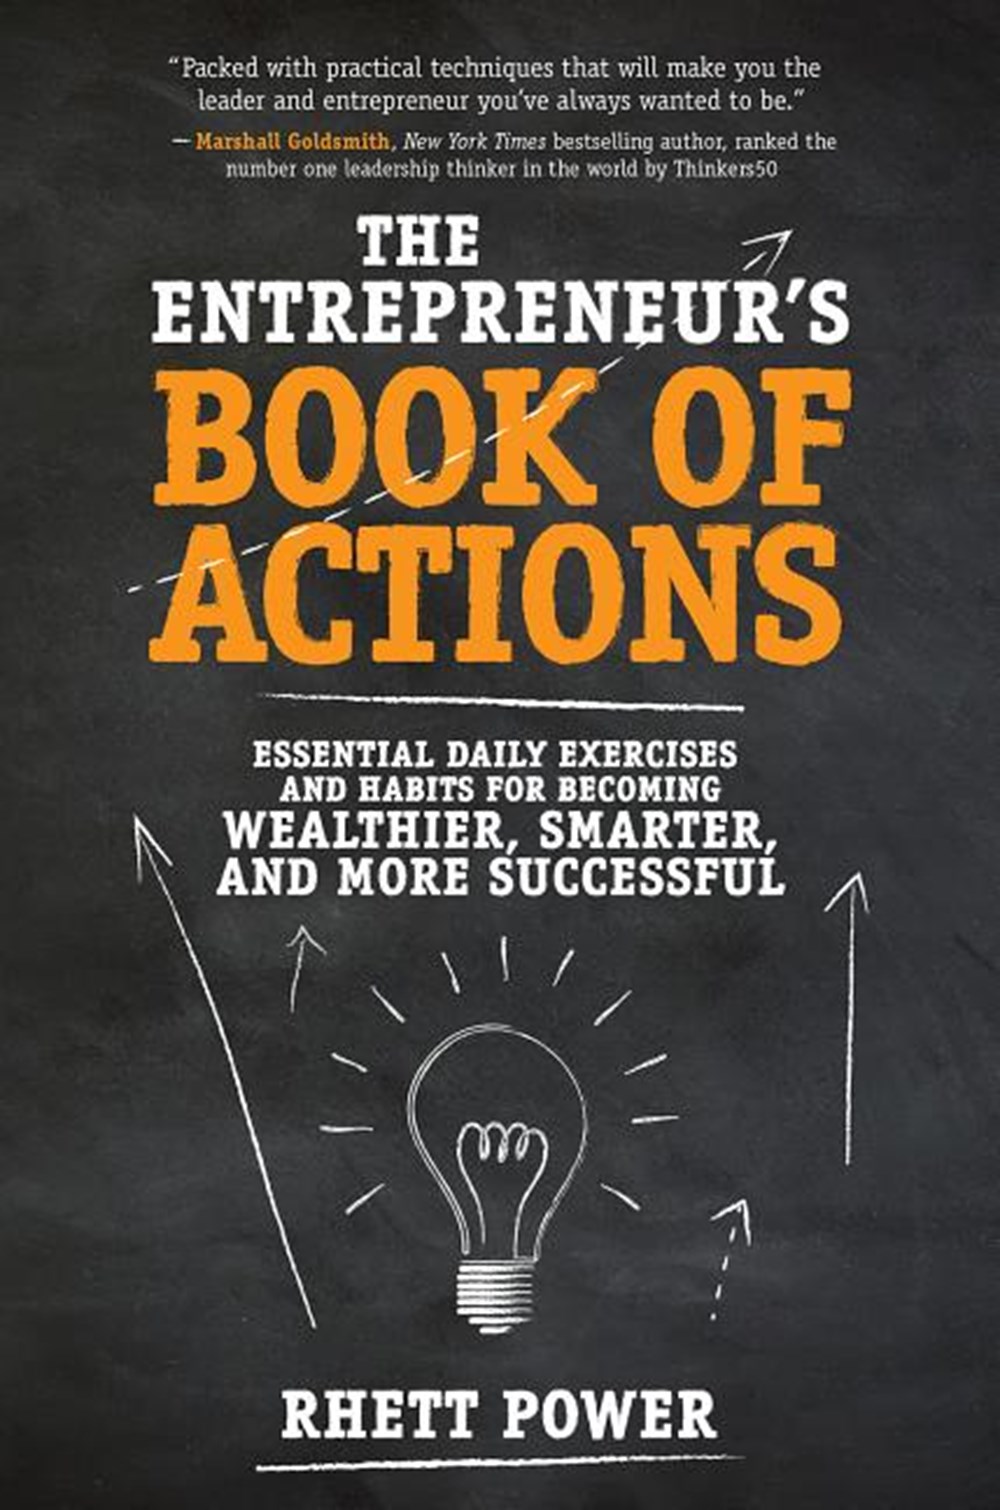 Entrepreneurs Book of Actions Essential Daily Exercises and Habits for Becoming Wealthier, Smarter, 